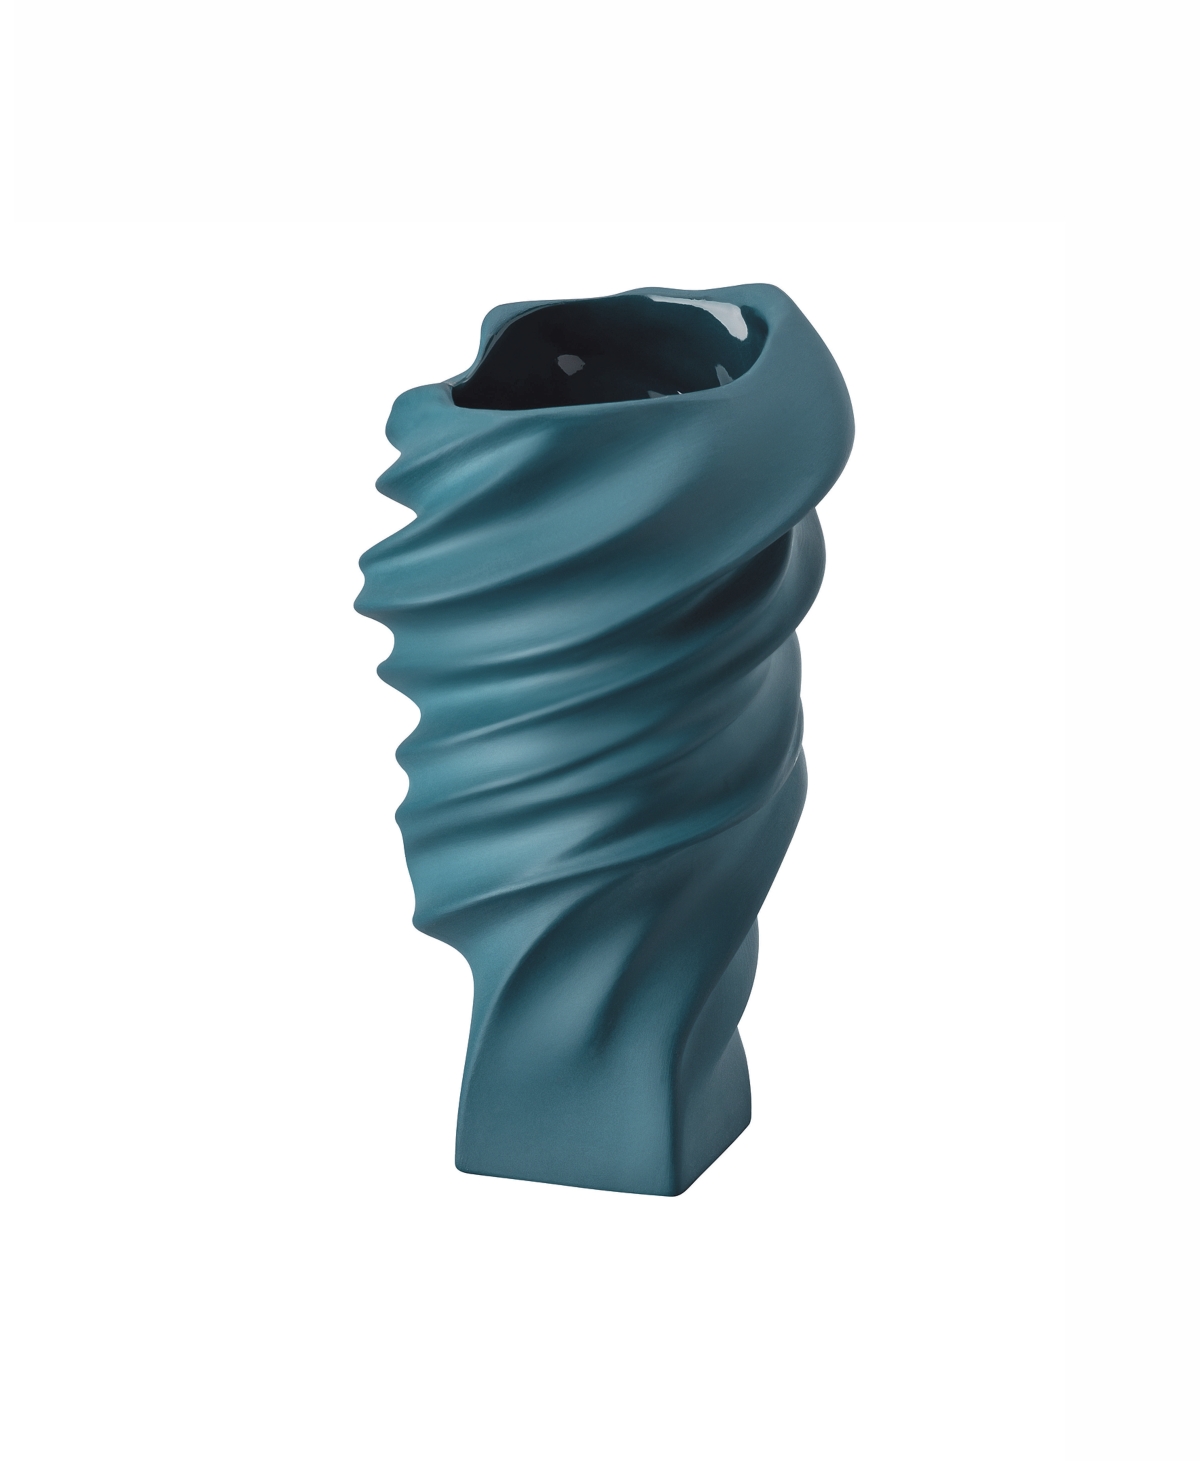 Rosenthal Squall Abyss Mini Vase In Dark Teal